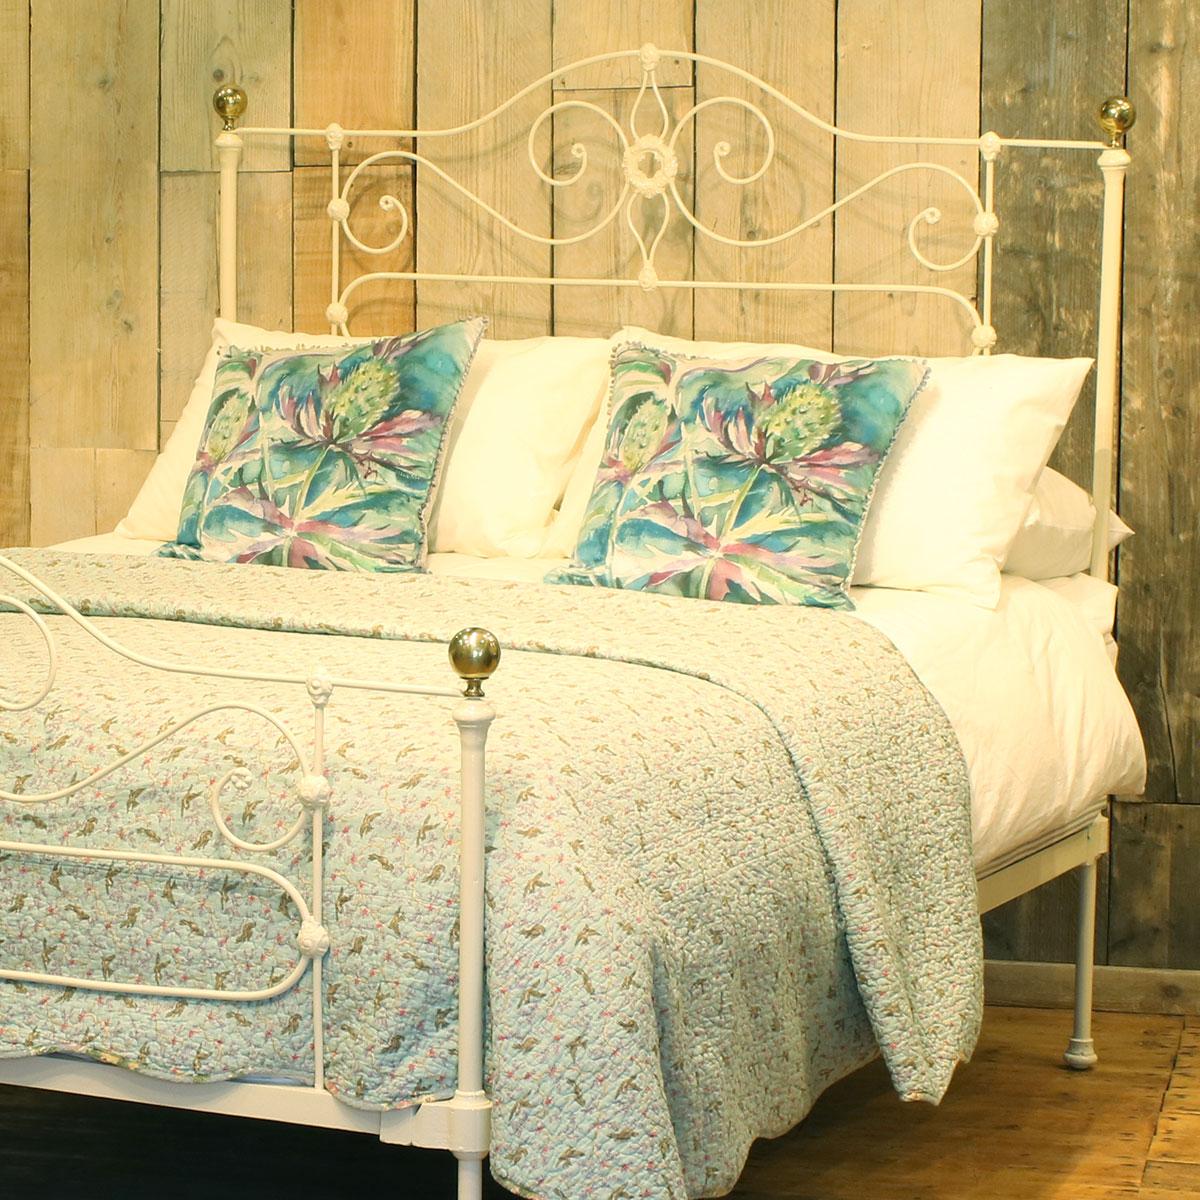 Antique bed in cream with decorative castings and delicate panels.

This bed accepts a UK King size or US Queen size (5ft, 60in or 150cm wide) base and mattress set.

The price includes a standard firm bed base to support the mattress. 

The